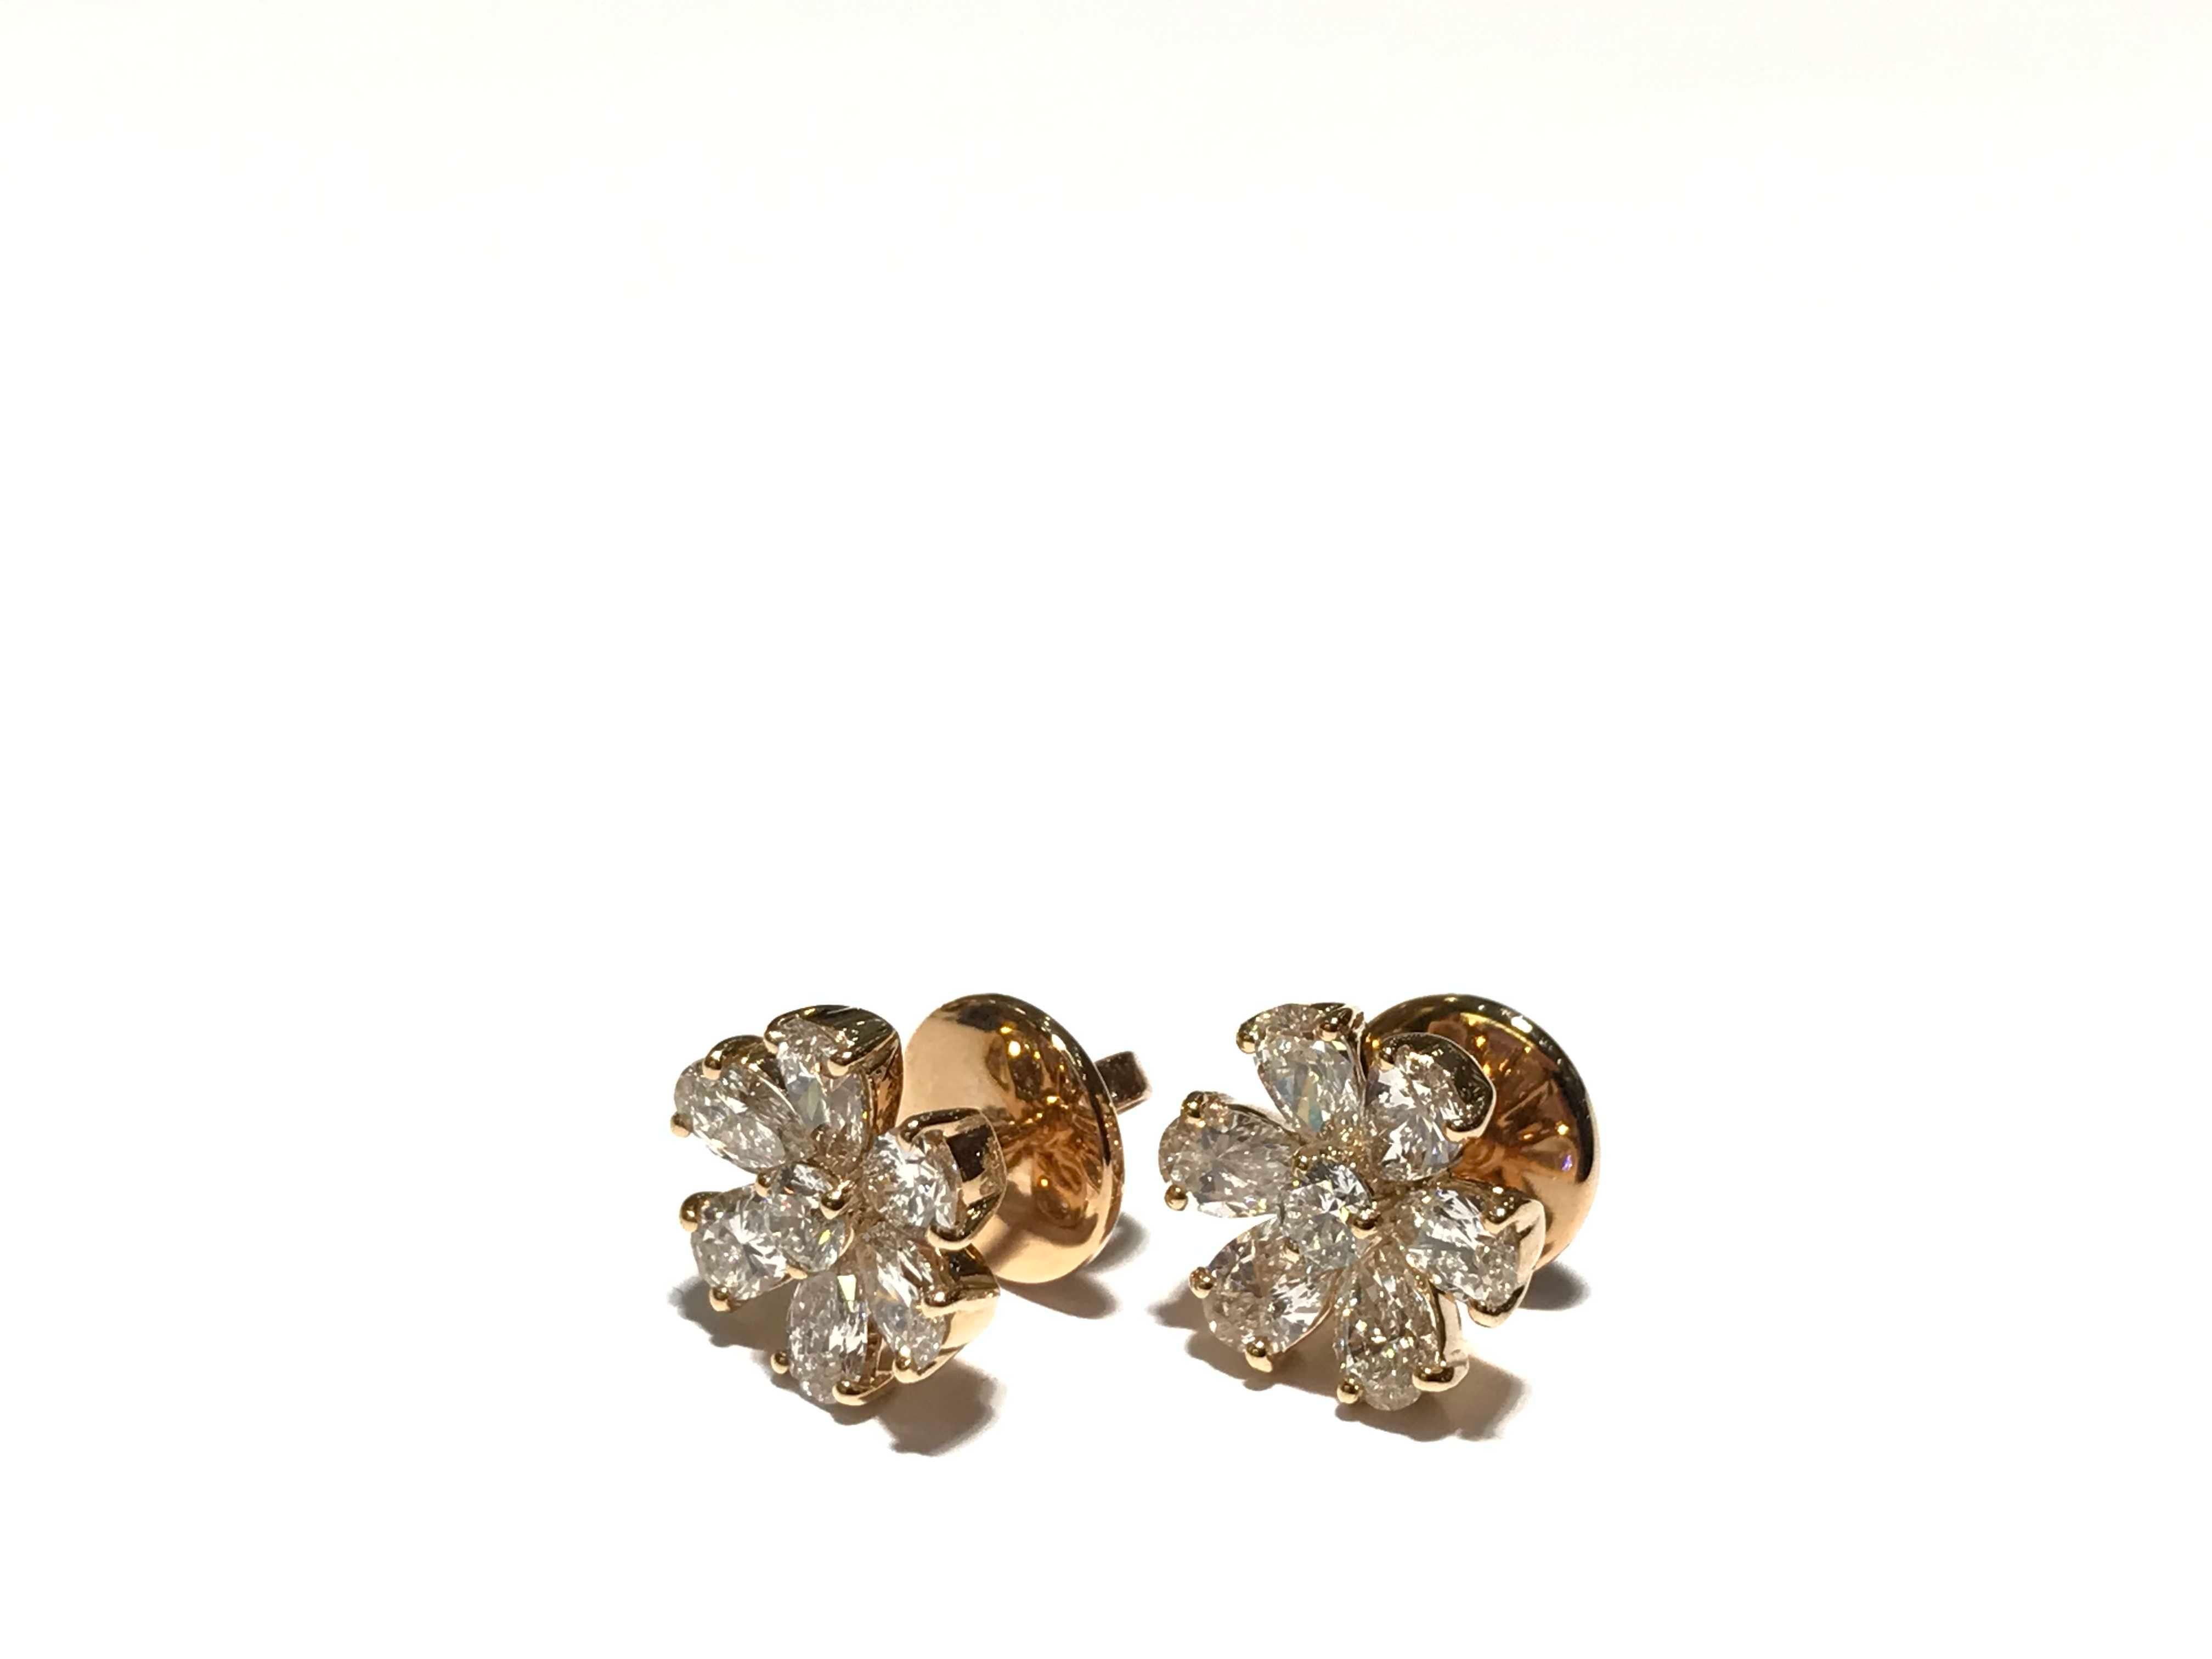 Crivelli Flower diamond Earrings set in 18k pink gold with white diamonds
diamonds 2.00 carat VS clarity EF colour 
12 pear shape
2 round shape in the center